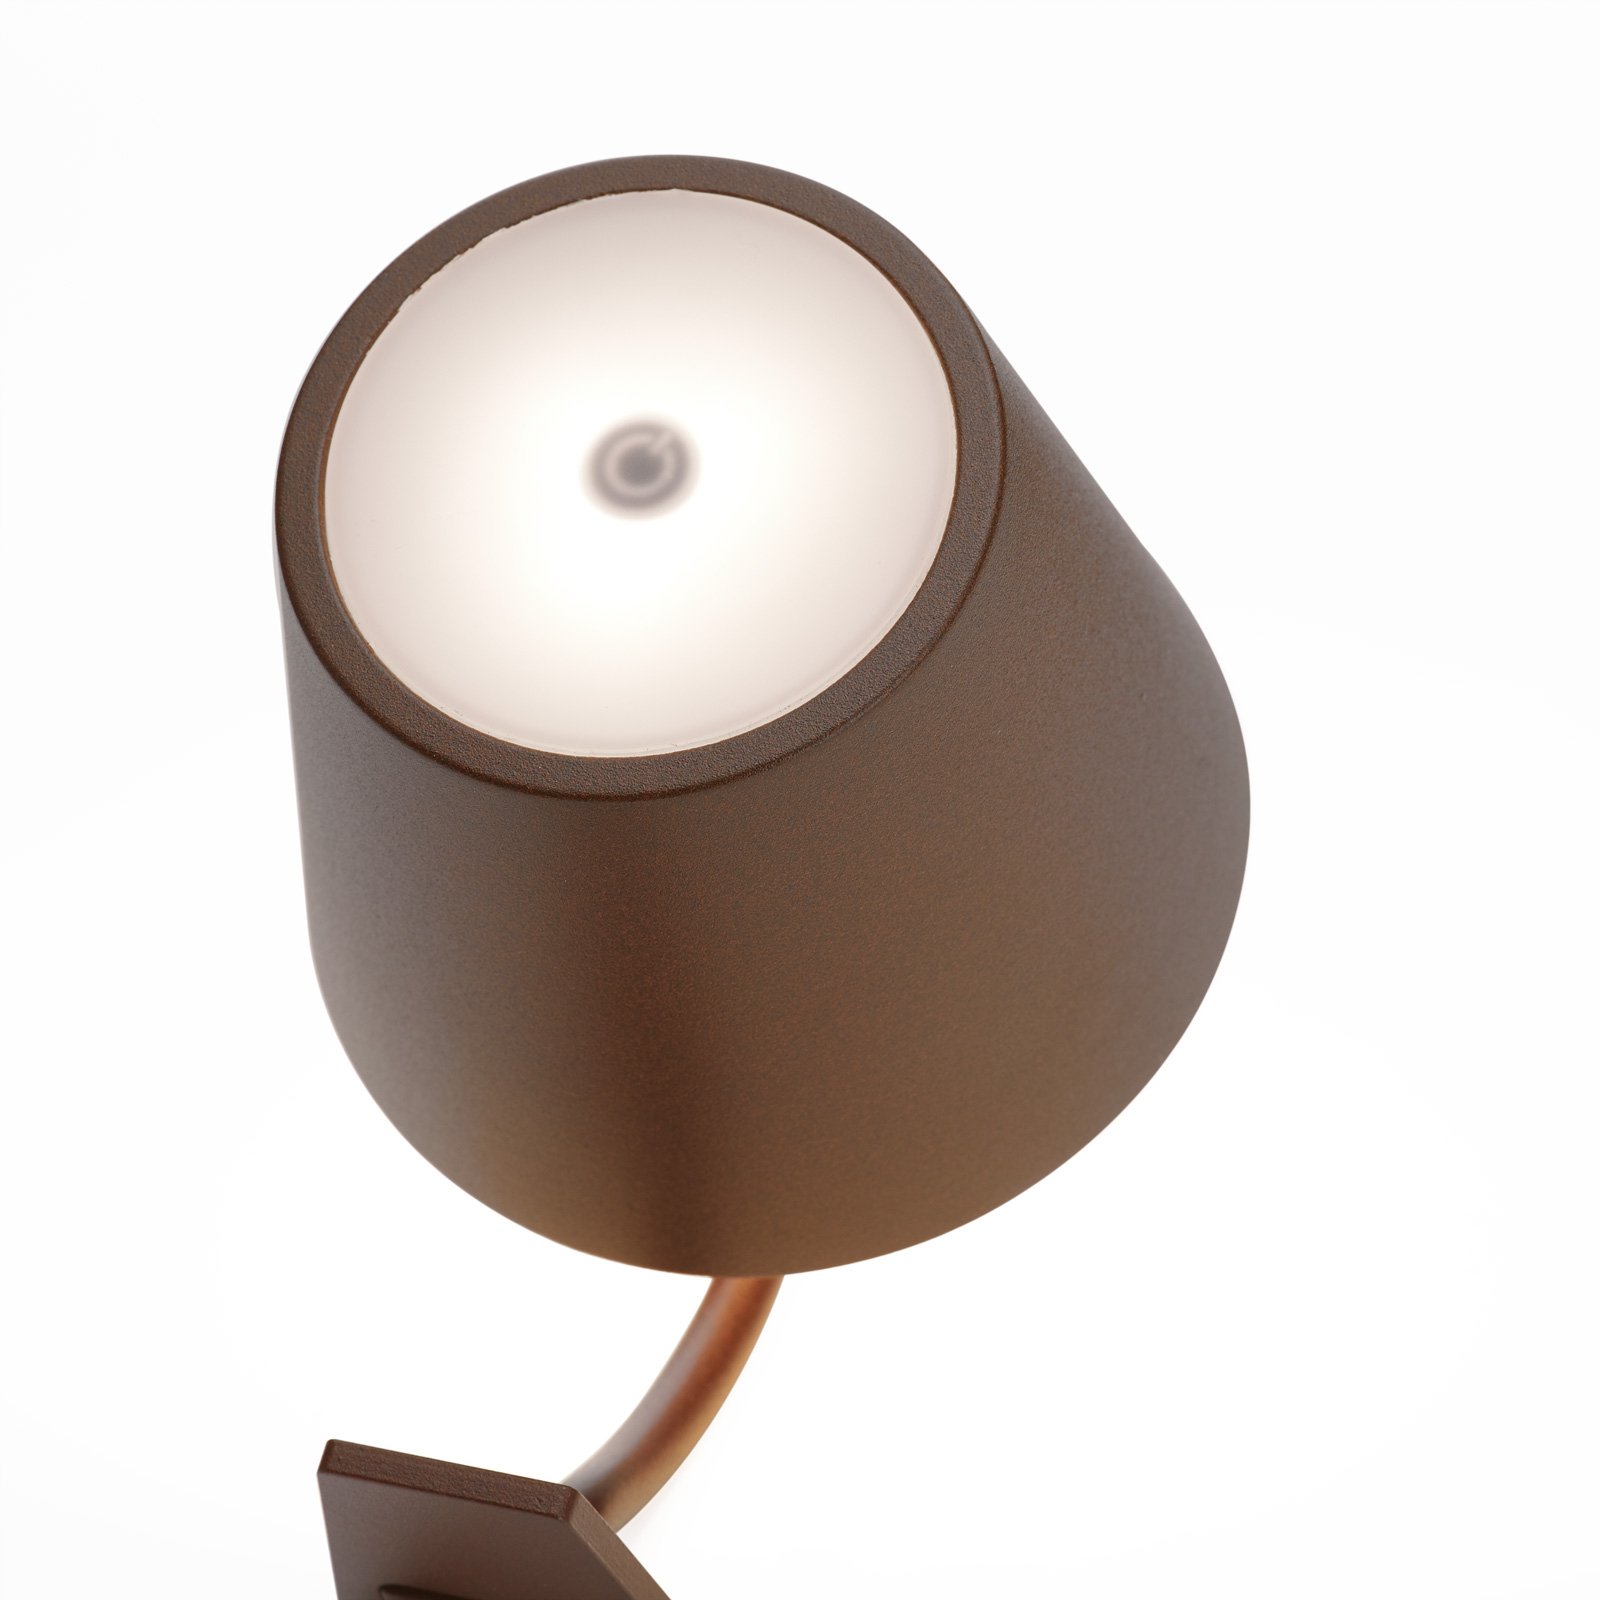 Zafferano Poldina LED wall light with rechargeable battery, brown